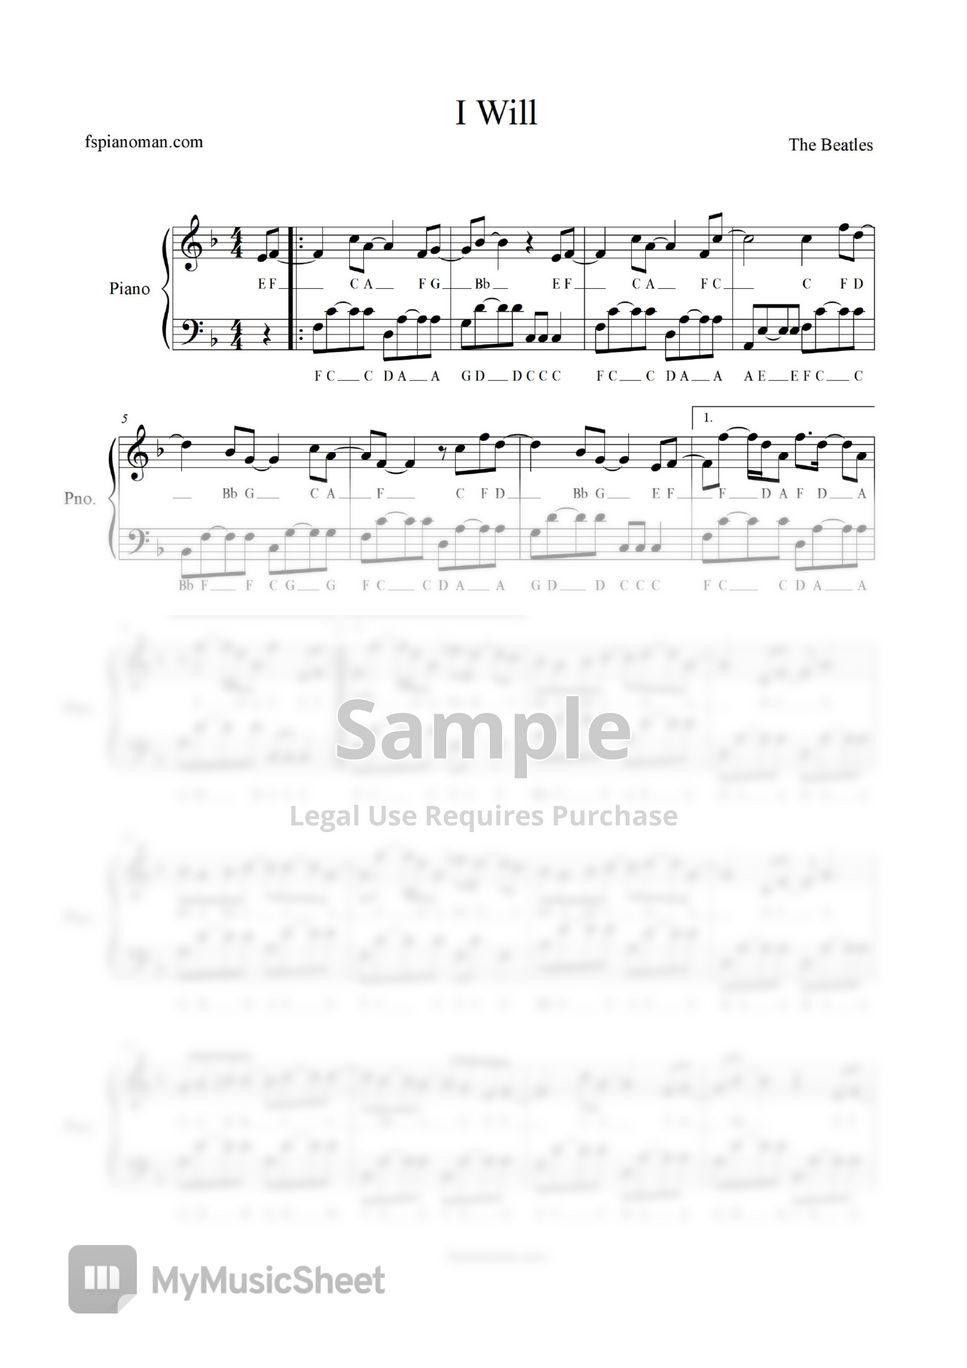 The Beatles - I Will (Notes Sheet) by freestyle pianoman